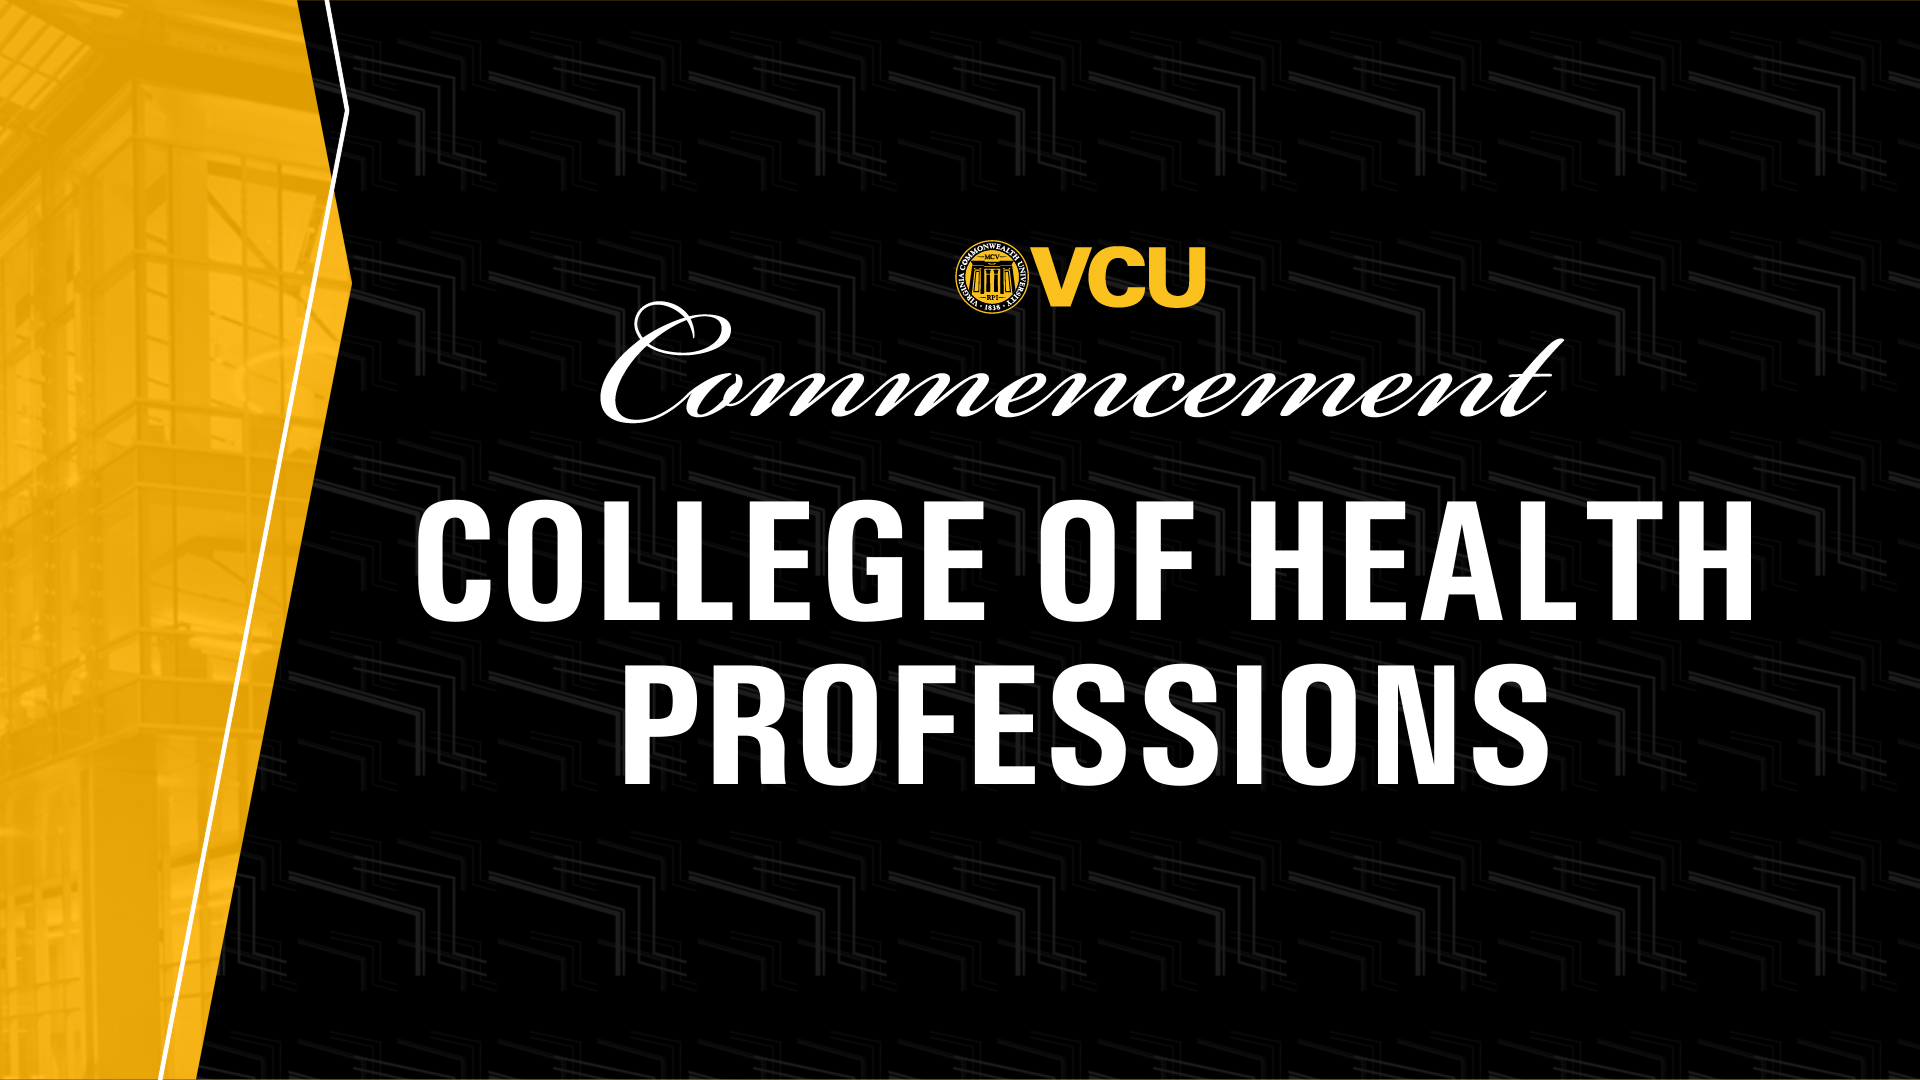 College of Health Professions